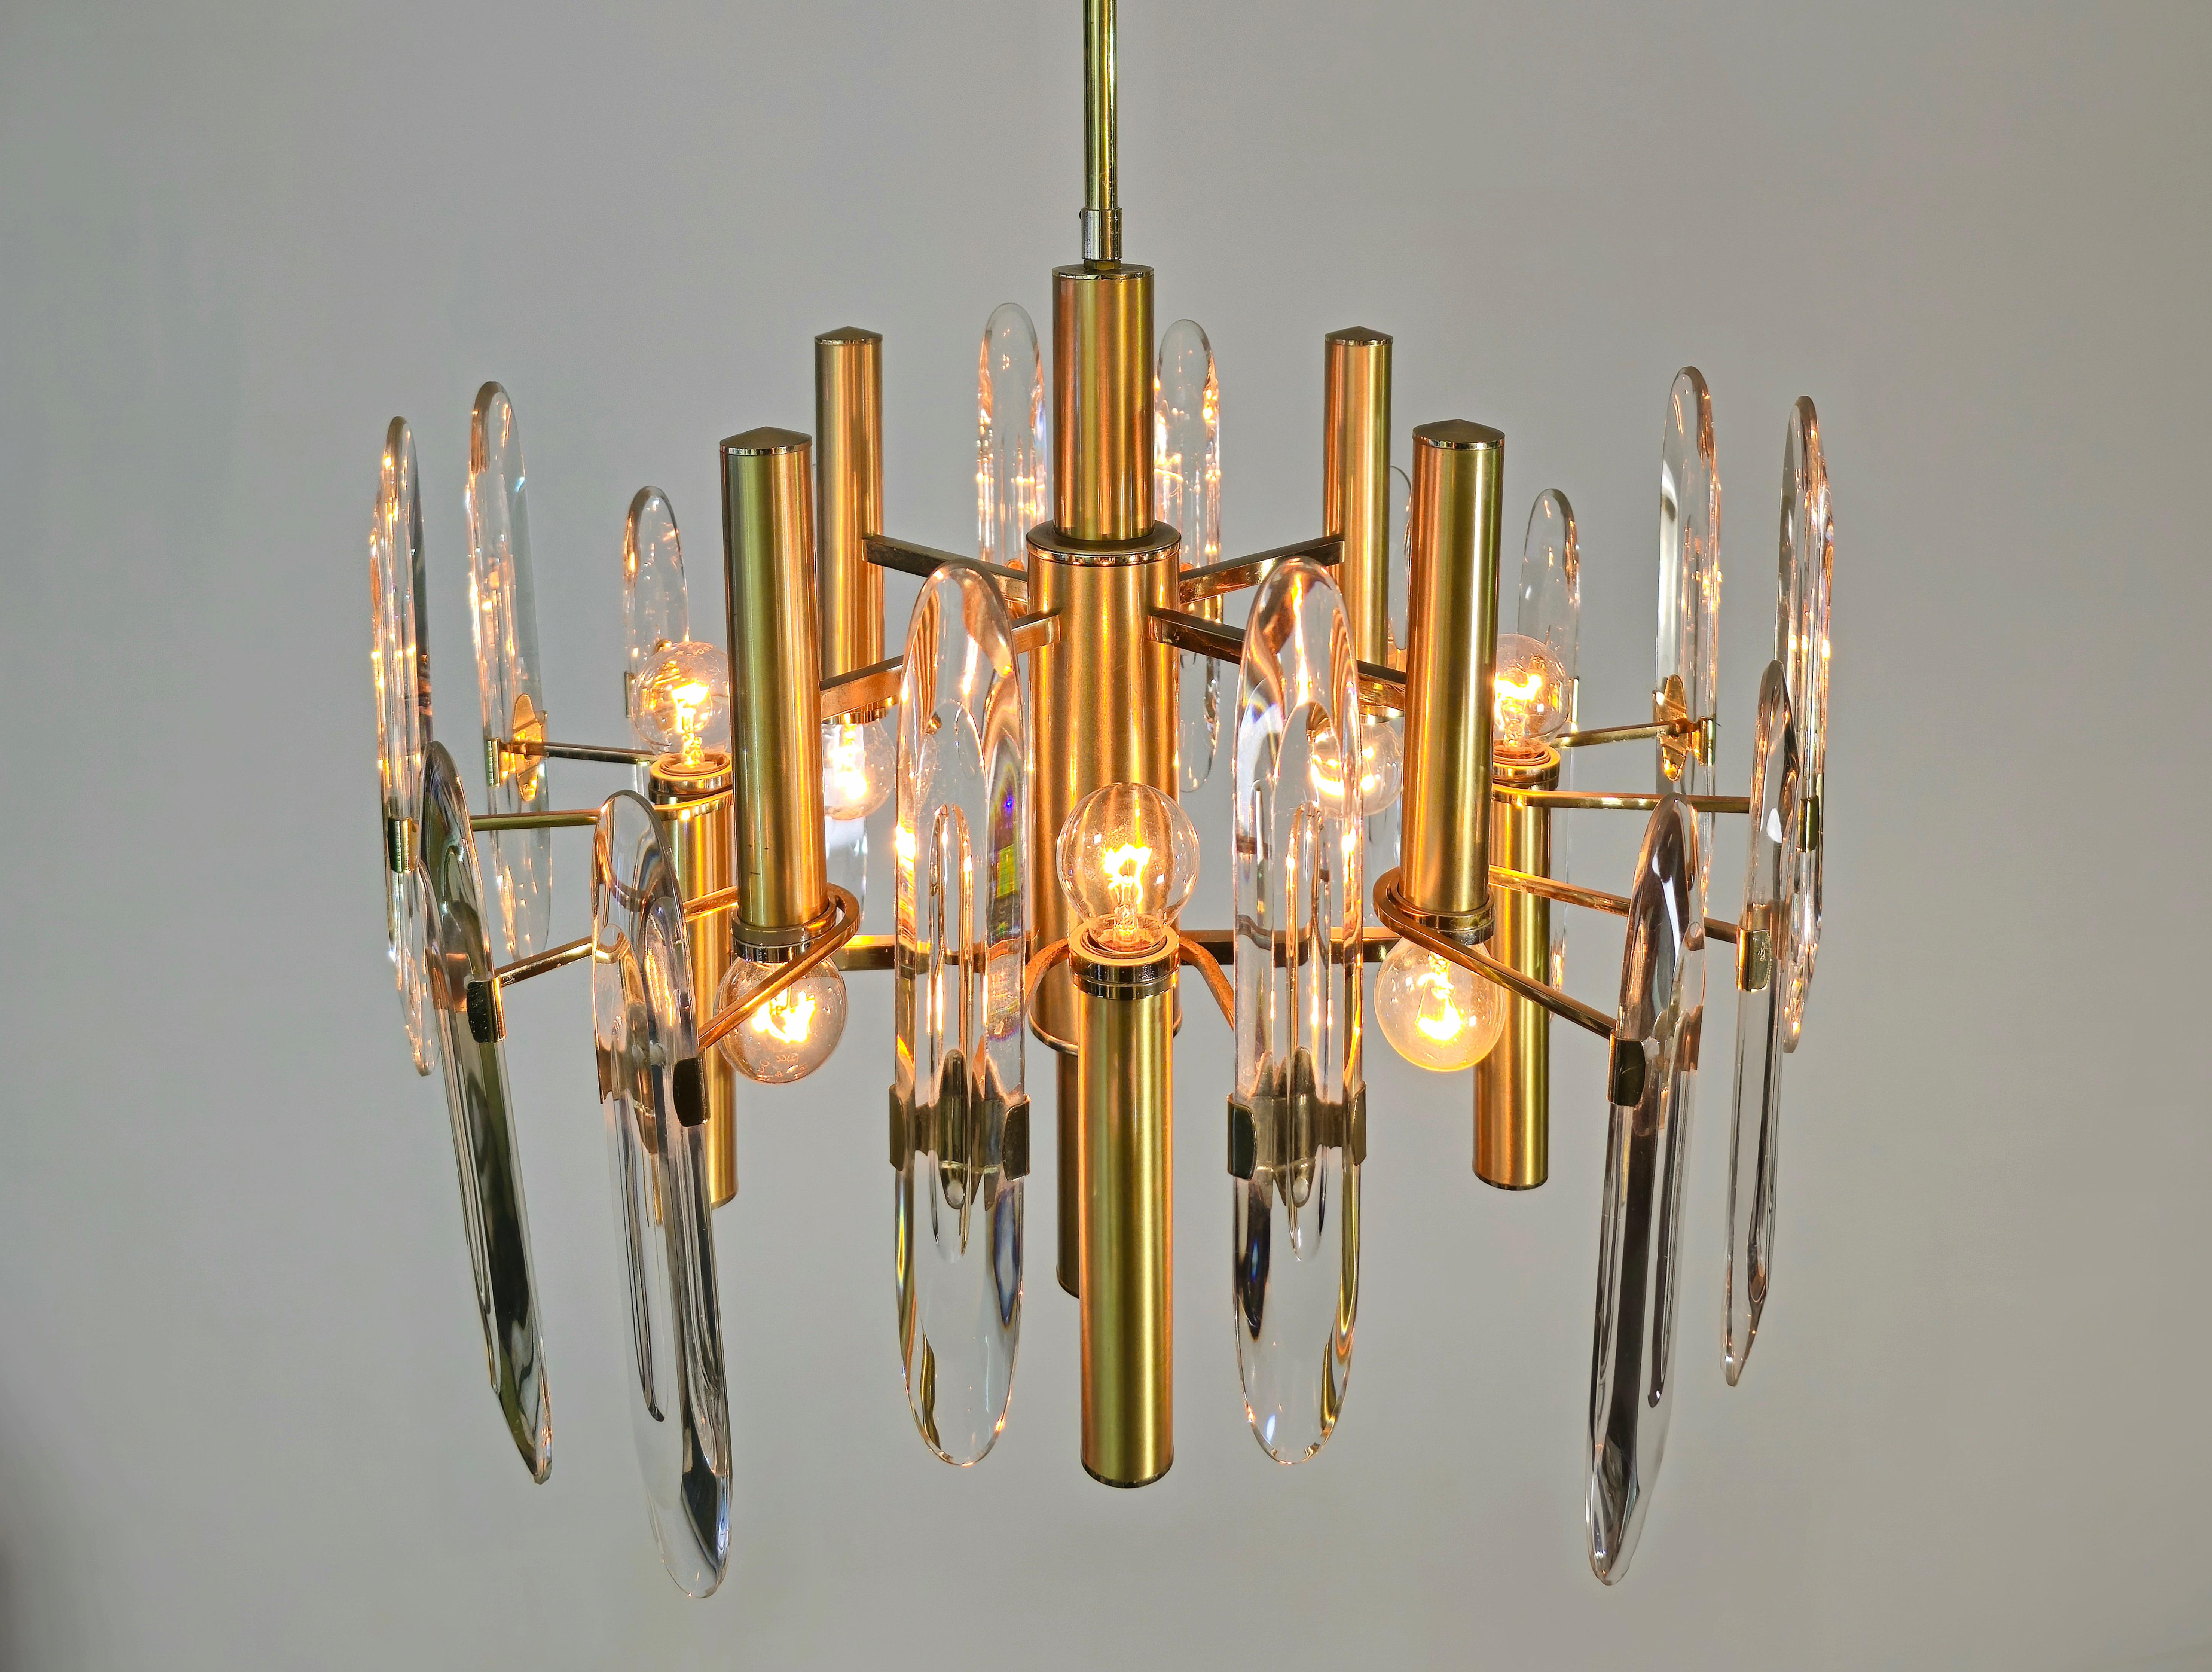  Chandelier Pendant Brass Crystal Glass Gaetano Sciolari Midcentury Italy 1970s In Good Condition For Sale In Palermo, IT